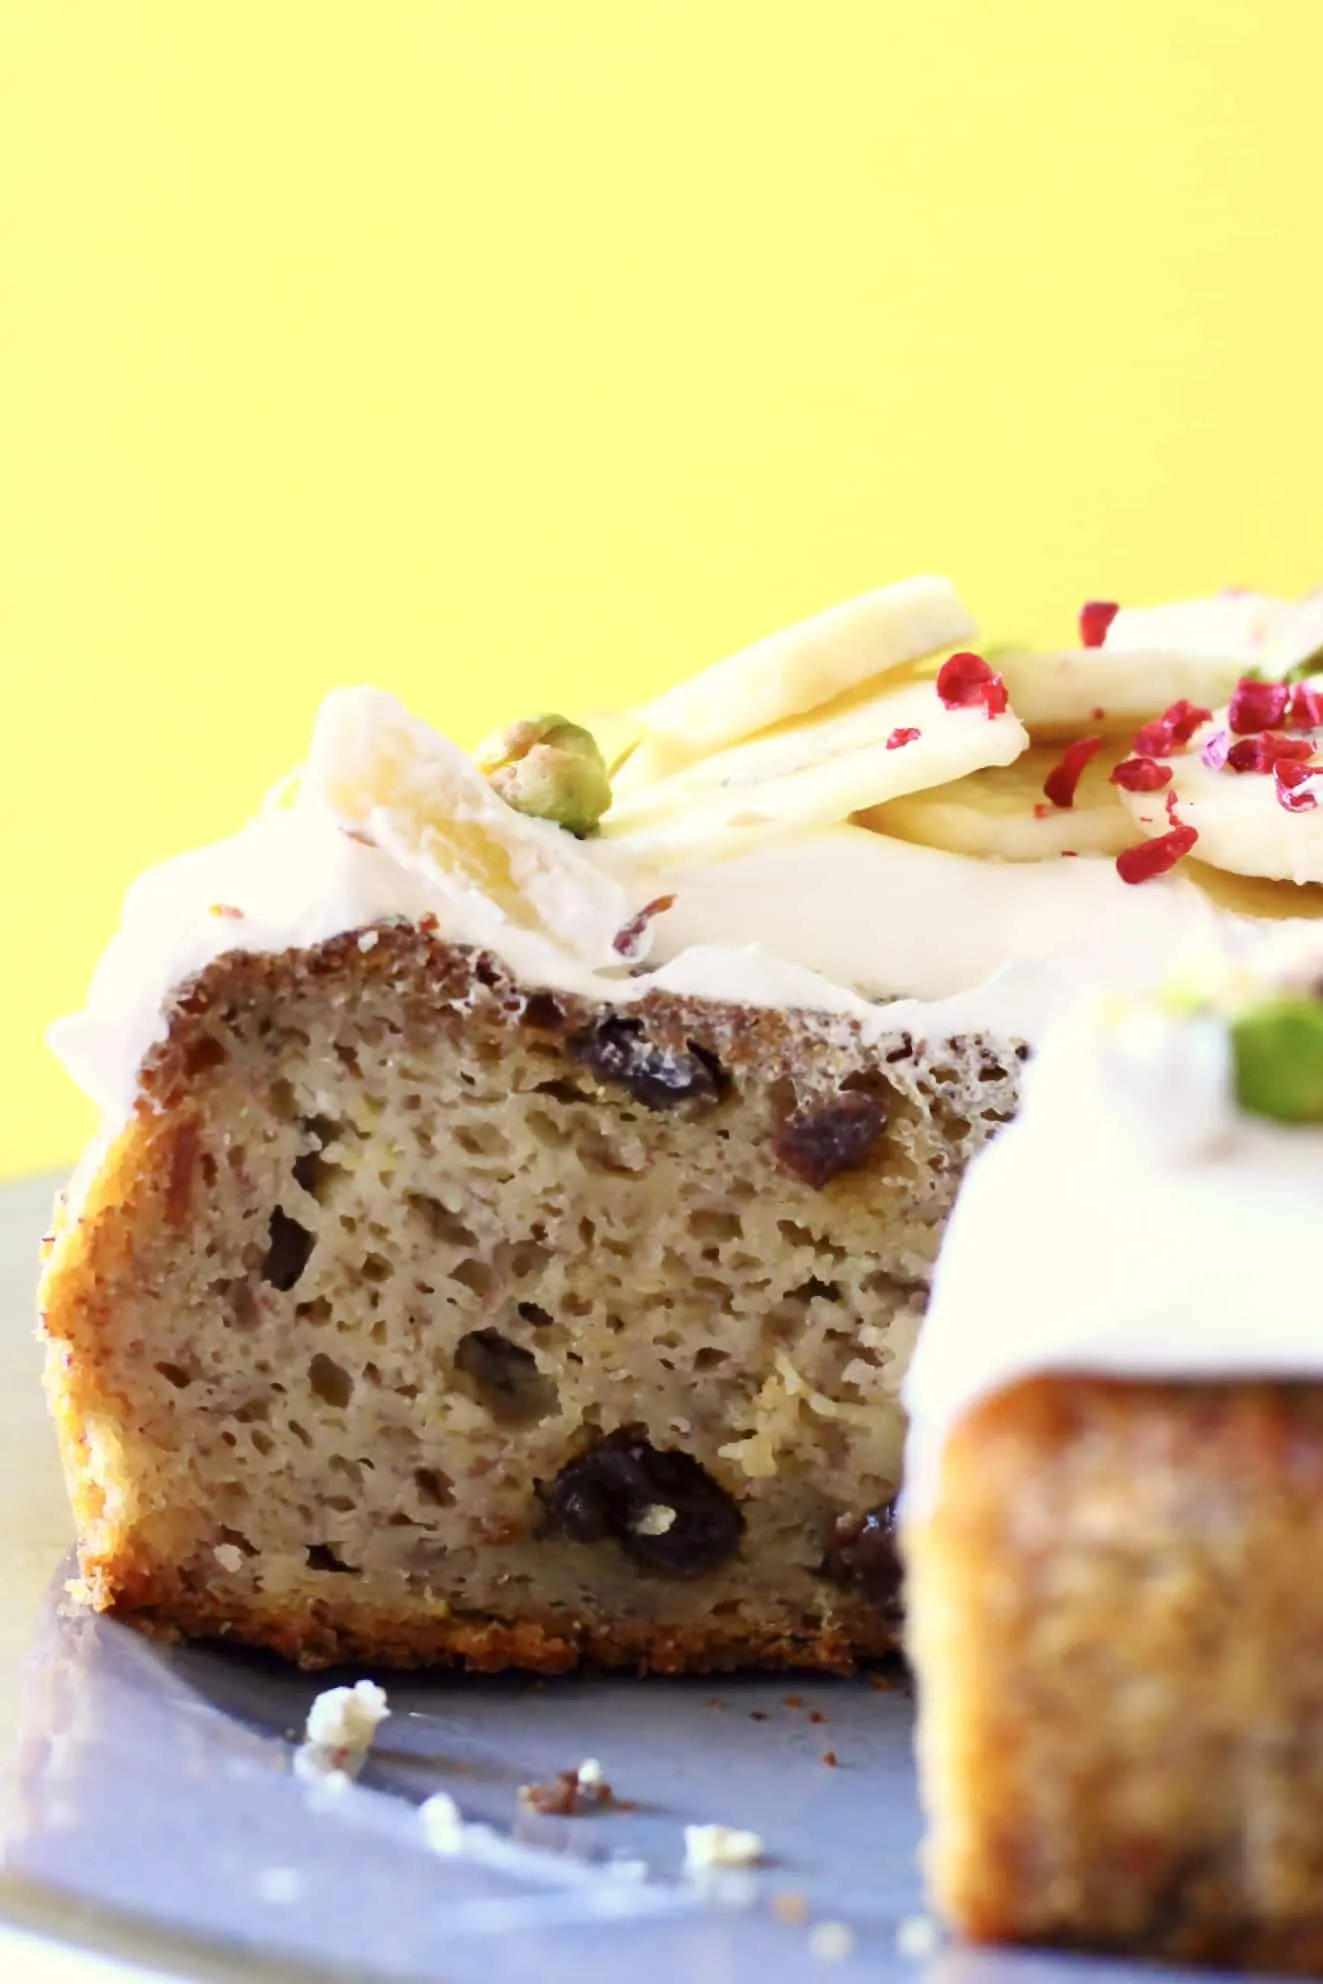 Sliced banana cake with raisins topped with white frosting and sliced bananas